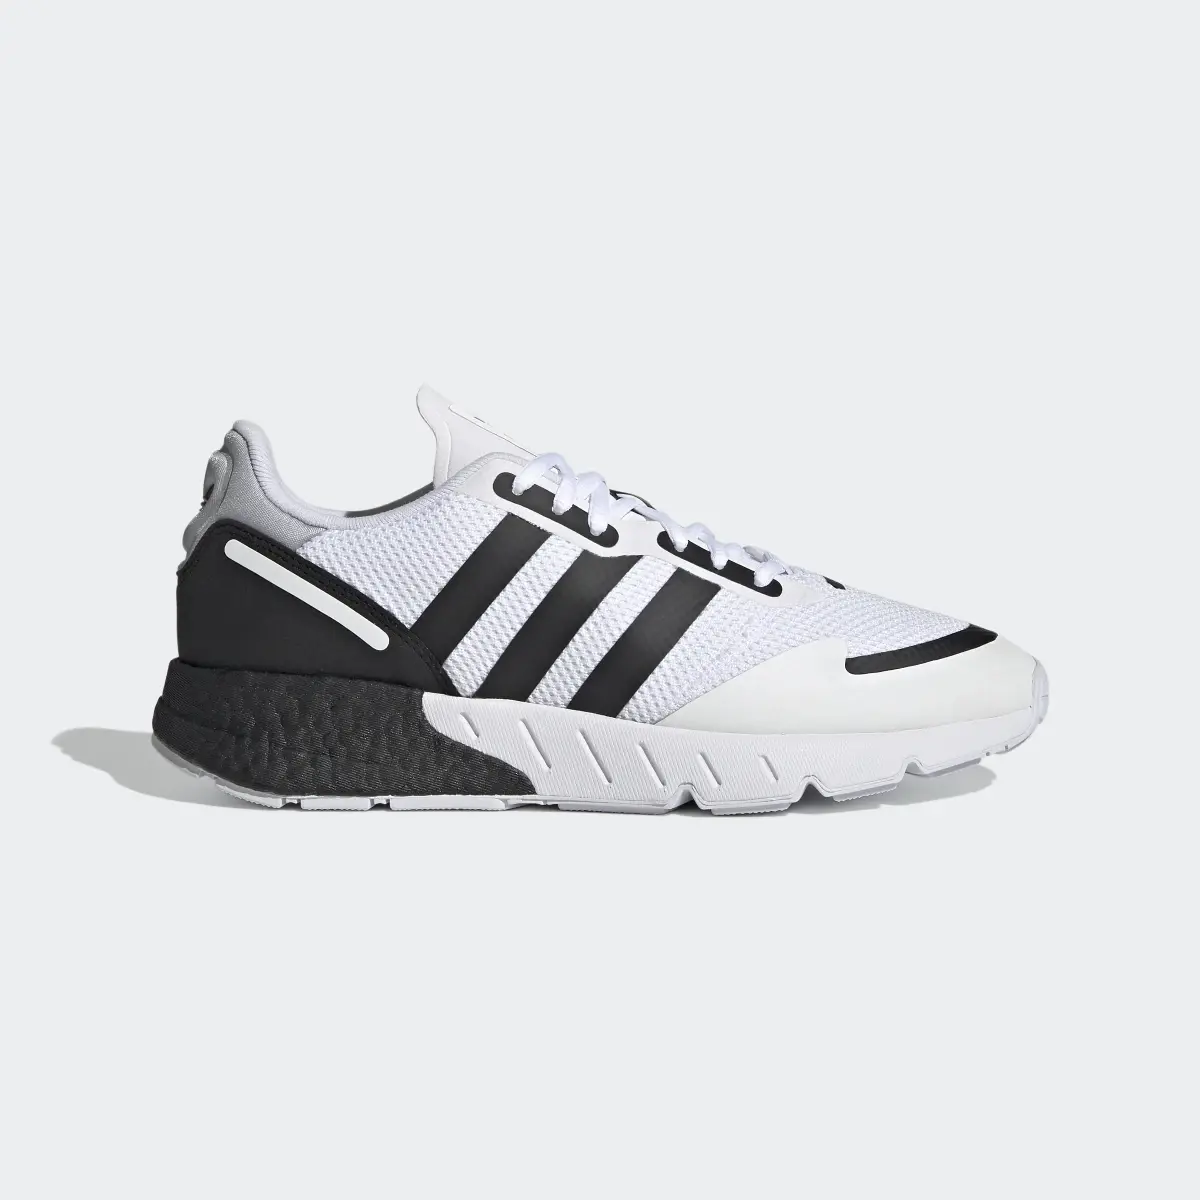 Adidas ZX 1K Boost Shoes. 2